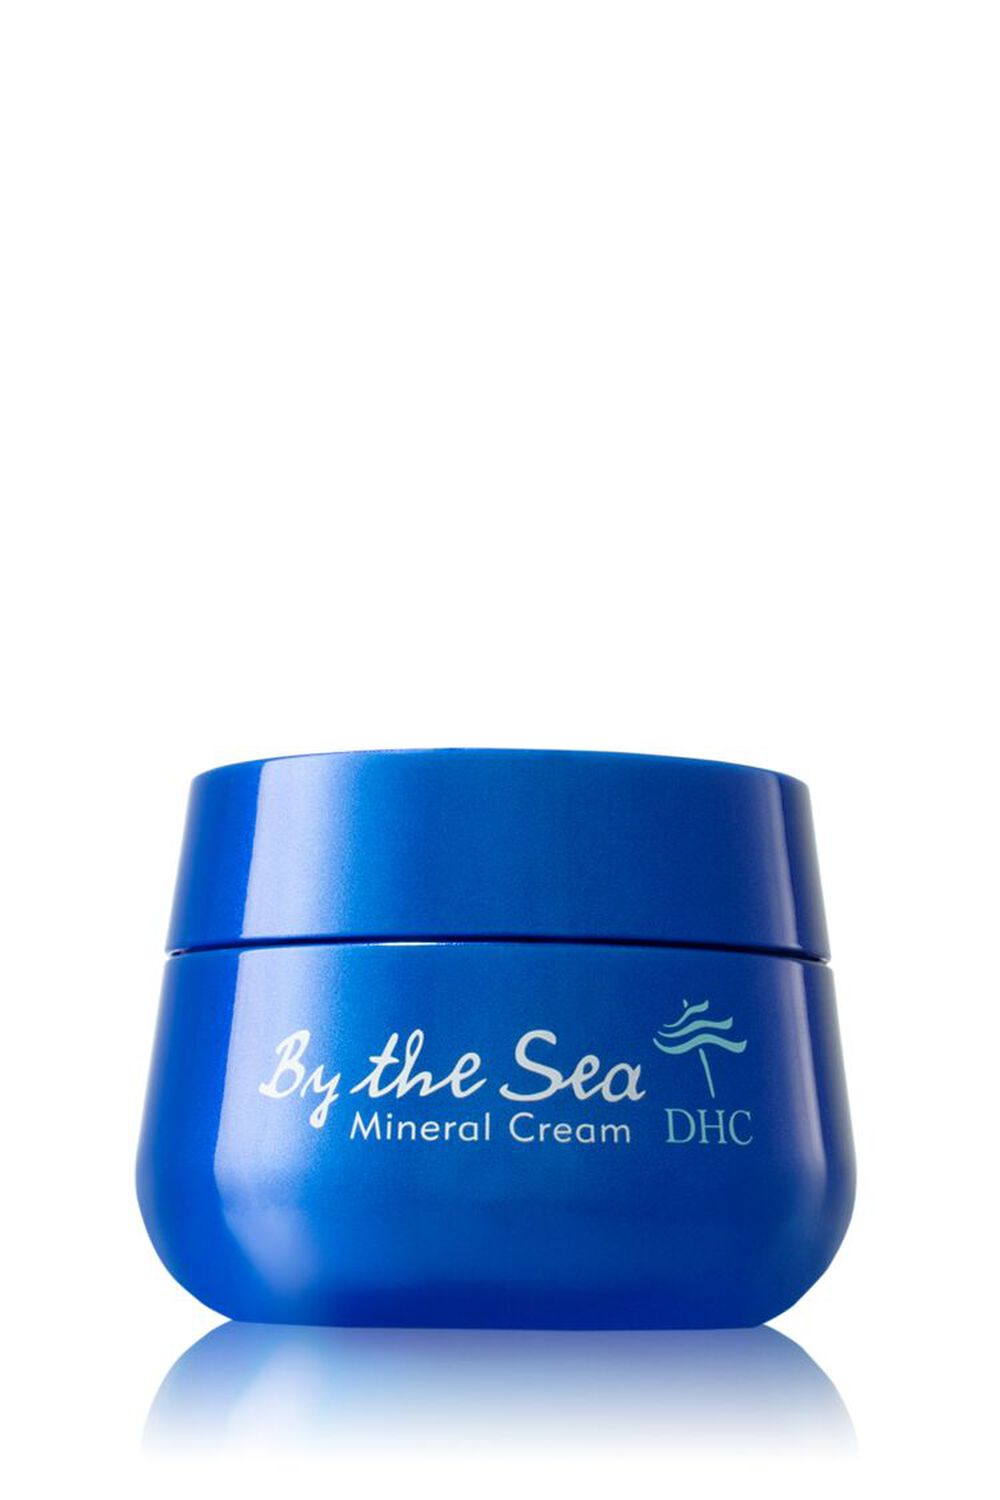 BLUE DHC By The Sea Mineral Cream, image 2